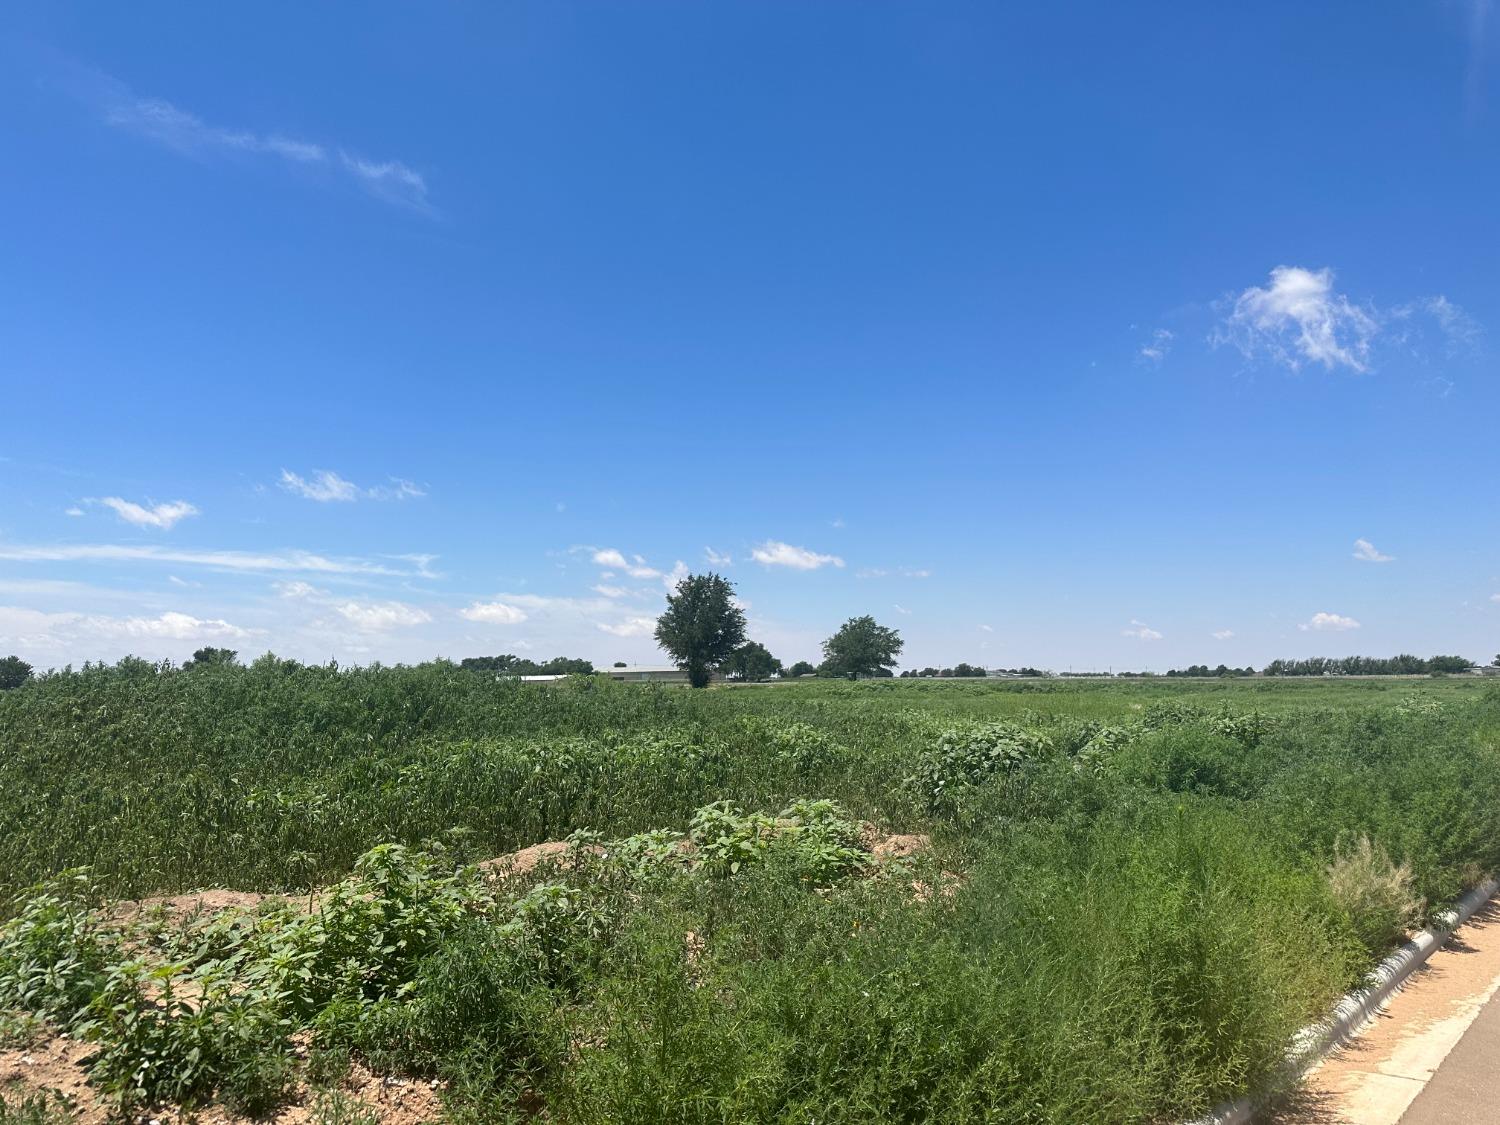 10.44 acres~ land for development in a fast growing area of SW Lubbock with approximately 600 feet of frontage on Milwaukee Ave. Minutes from Spur 327 and the Marsha Sharp Expressway.